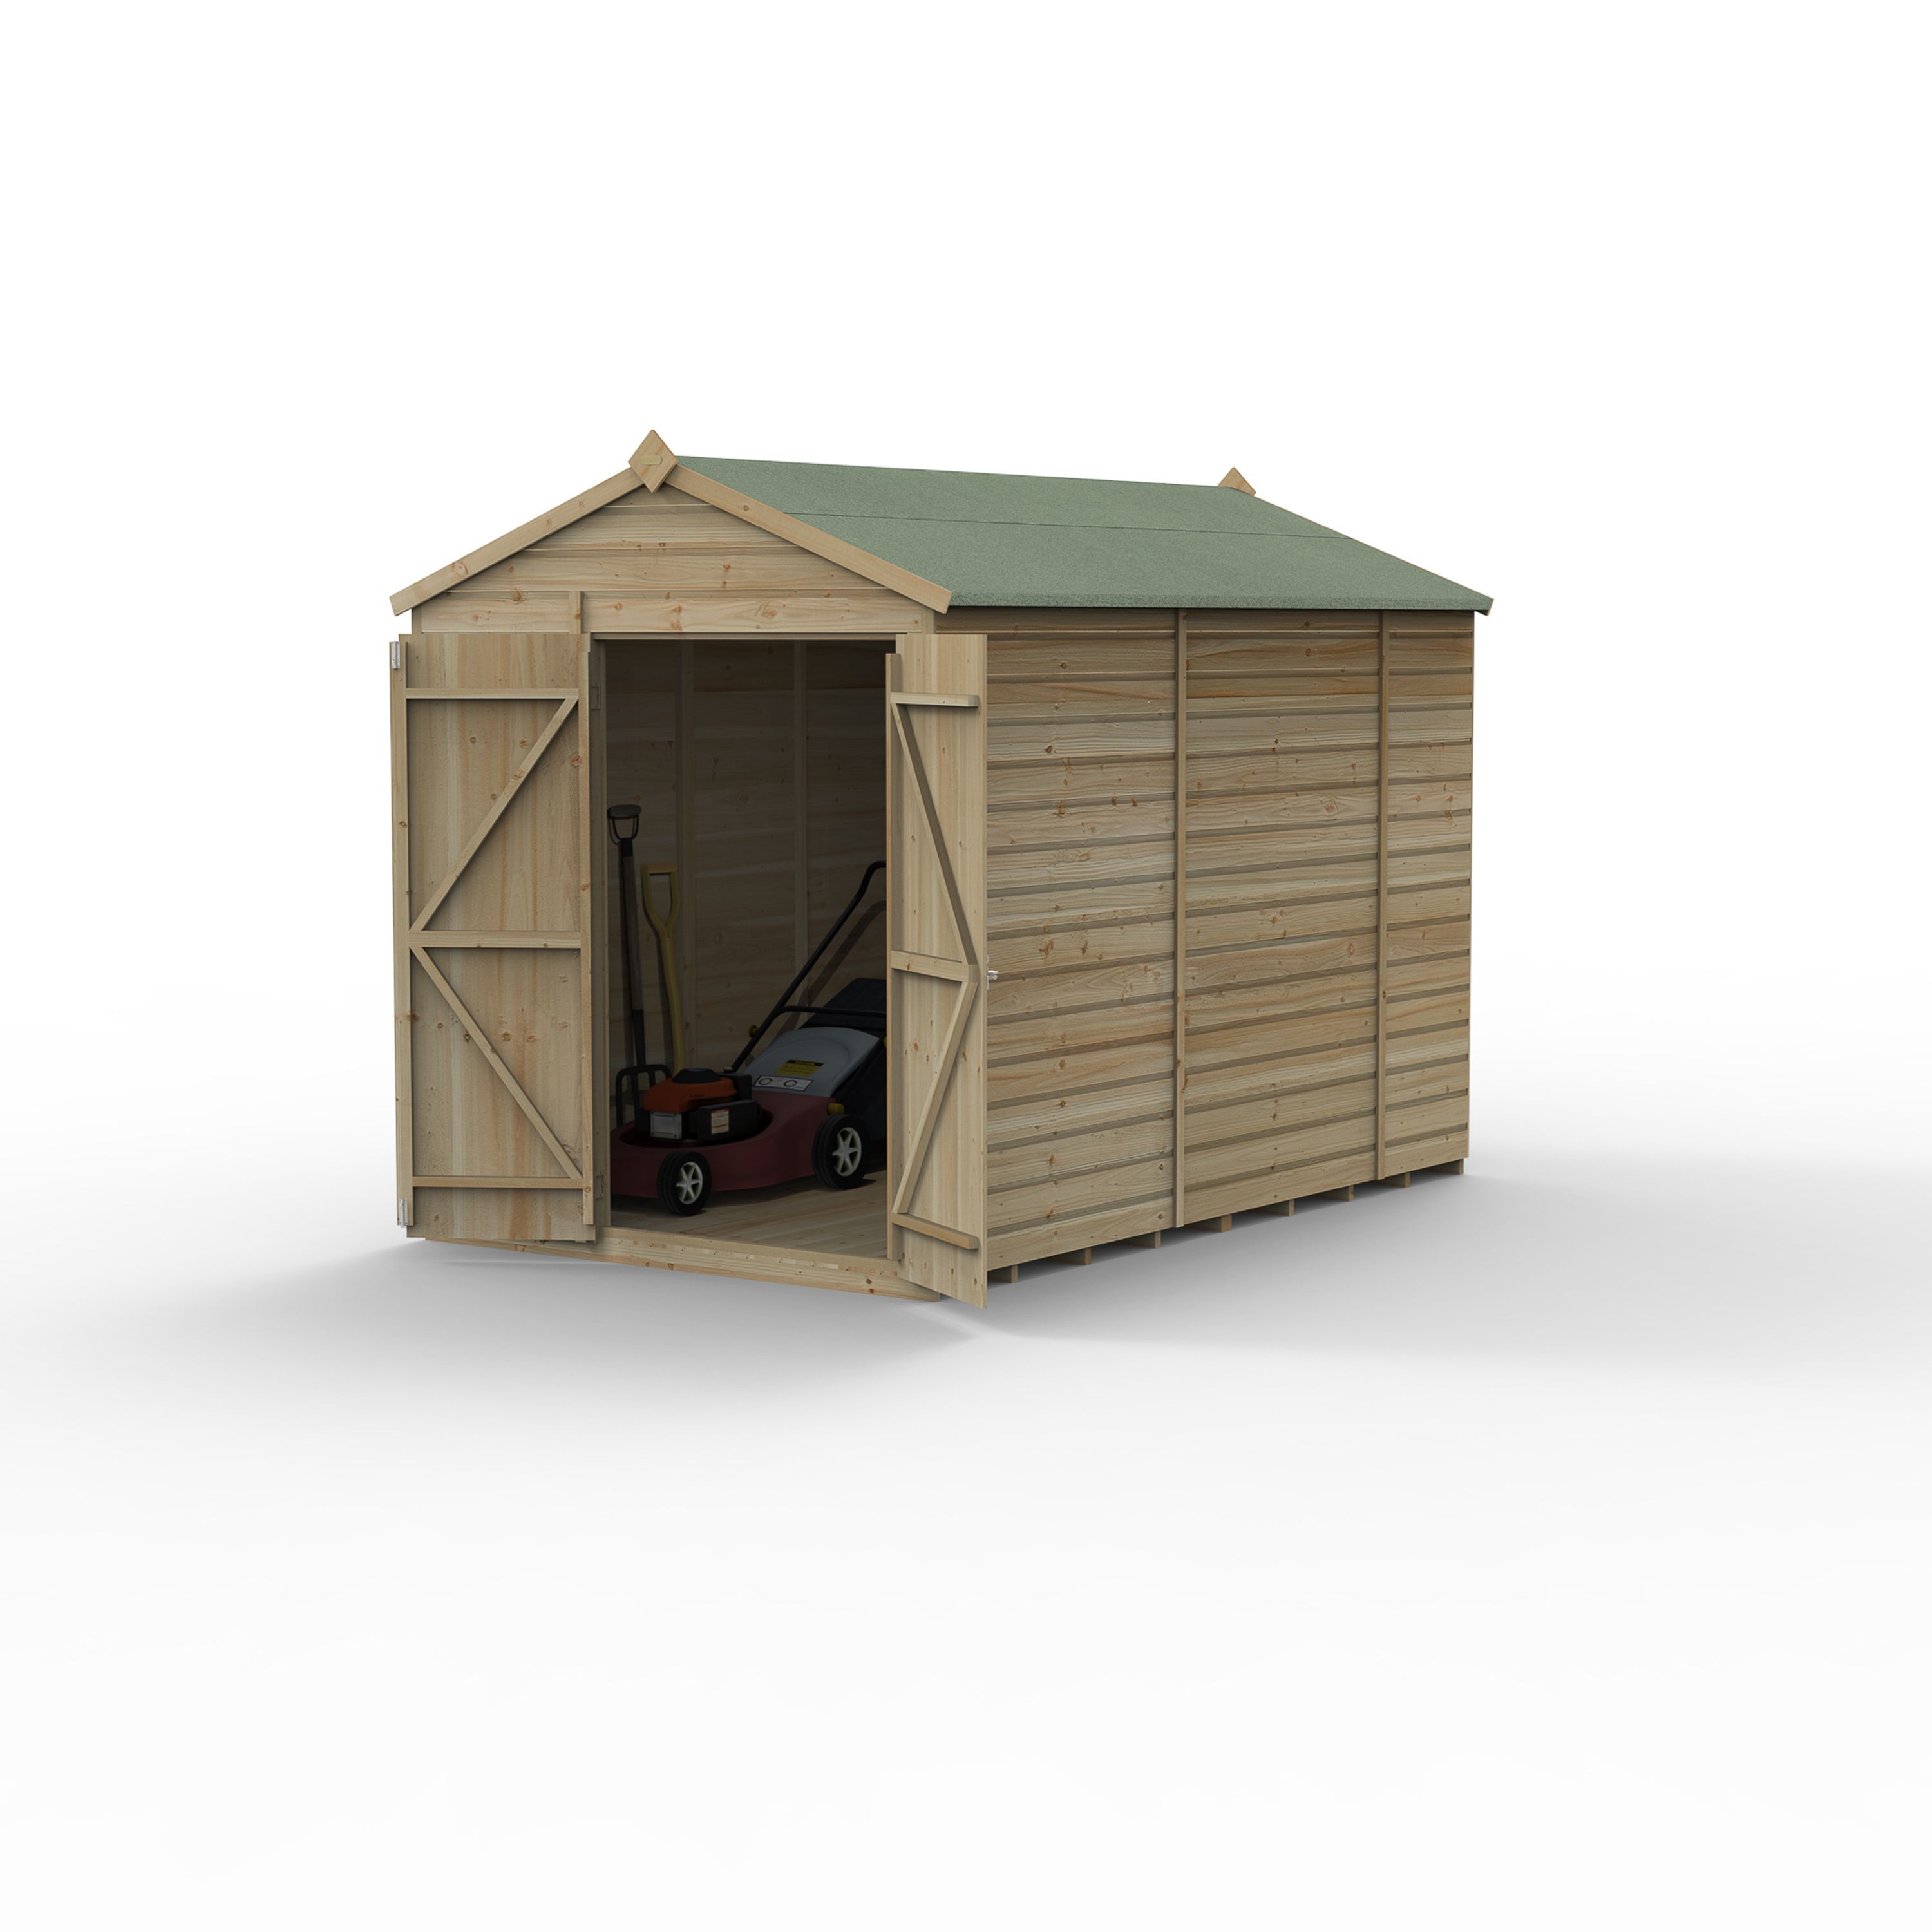 Forest Garden Beckwood 10x6 ft Apex Natural timber Wooden 2 door Shed with floor (Base included)